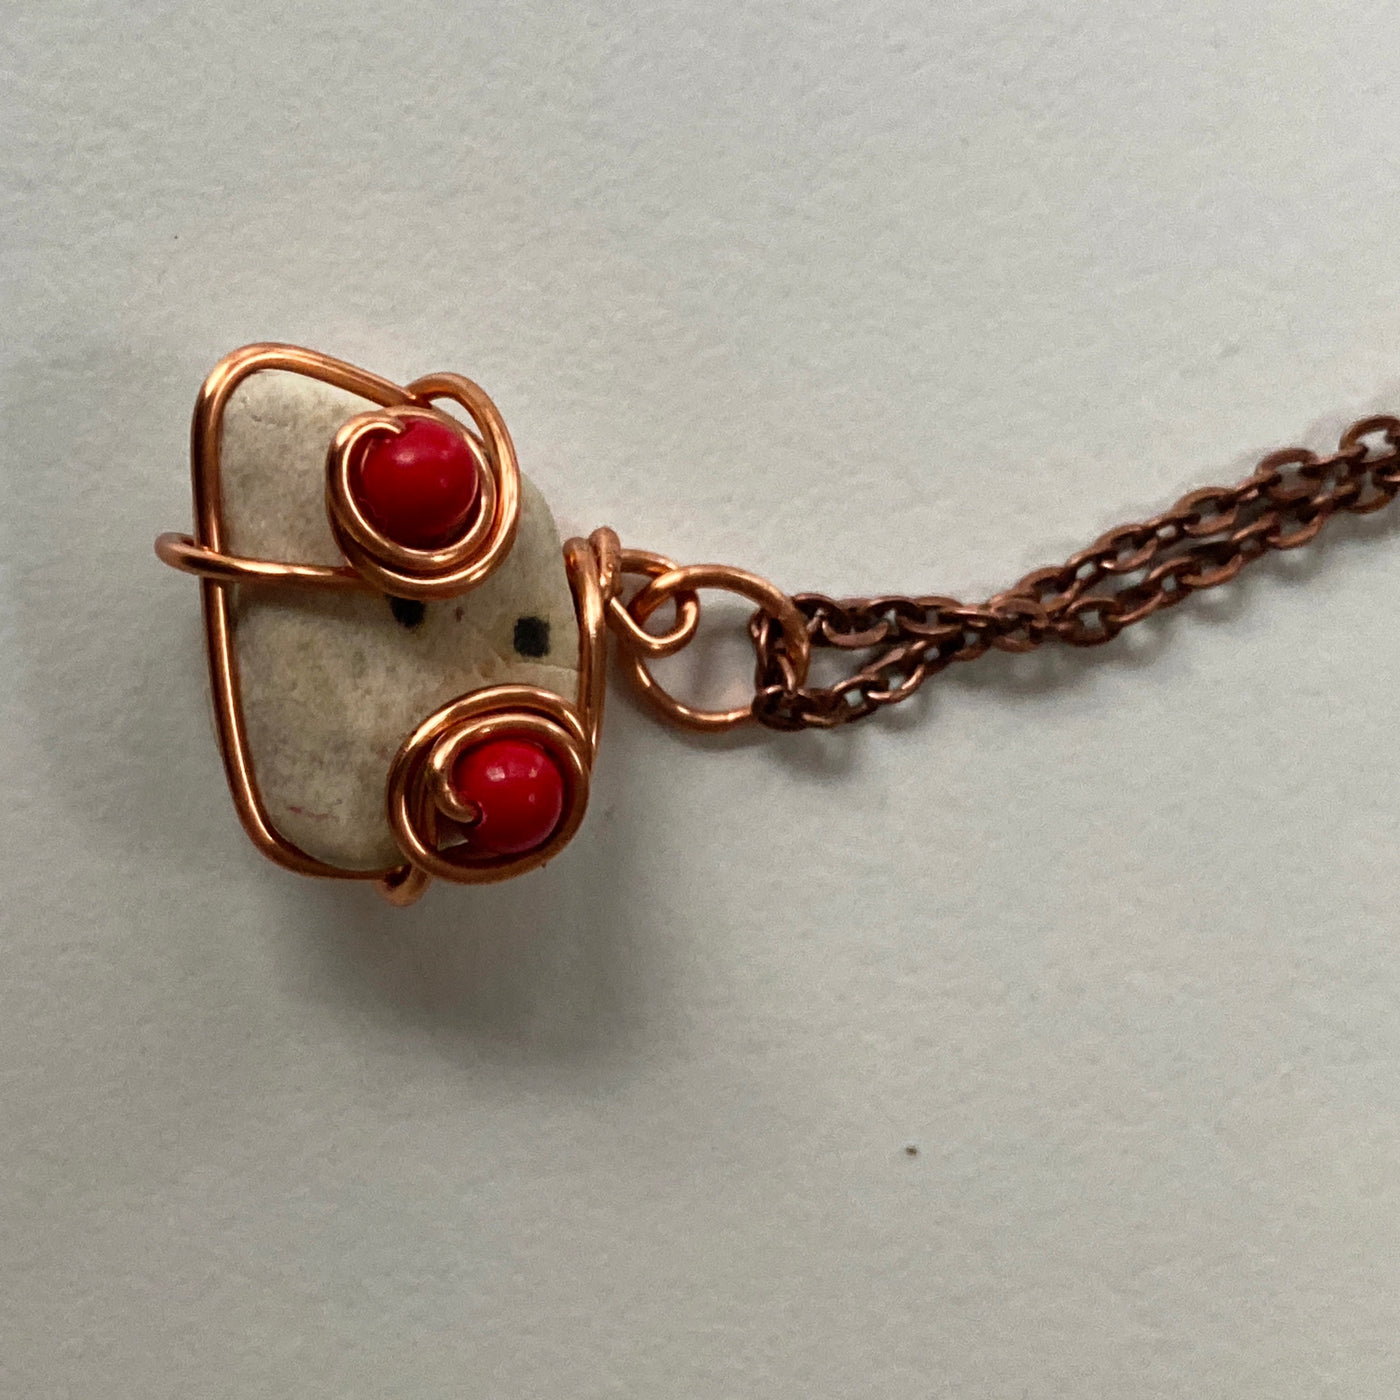 Small pendant. White natural stone, carnelian and wire. Elbastones collection.